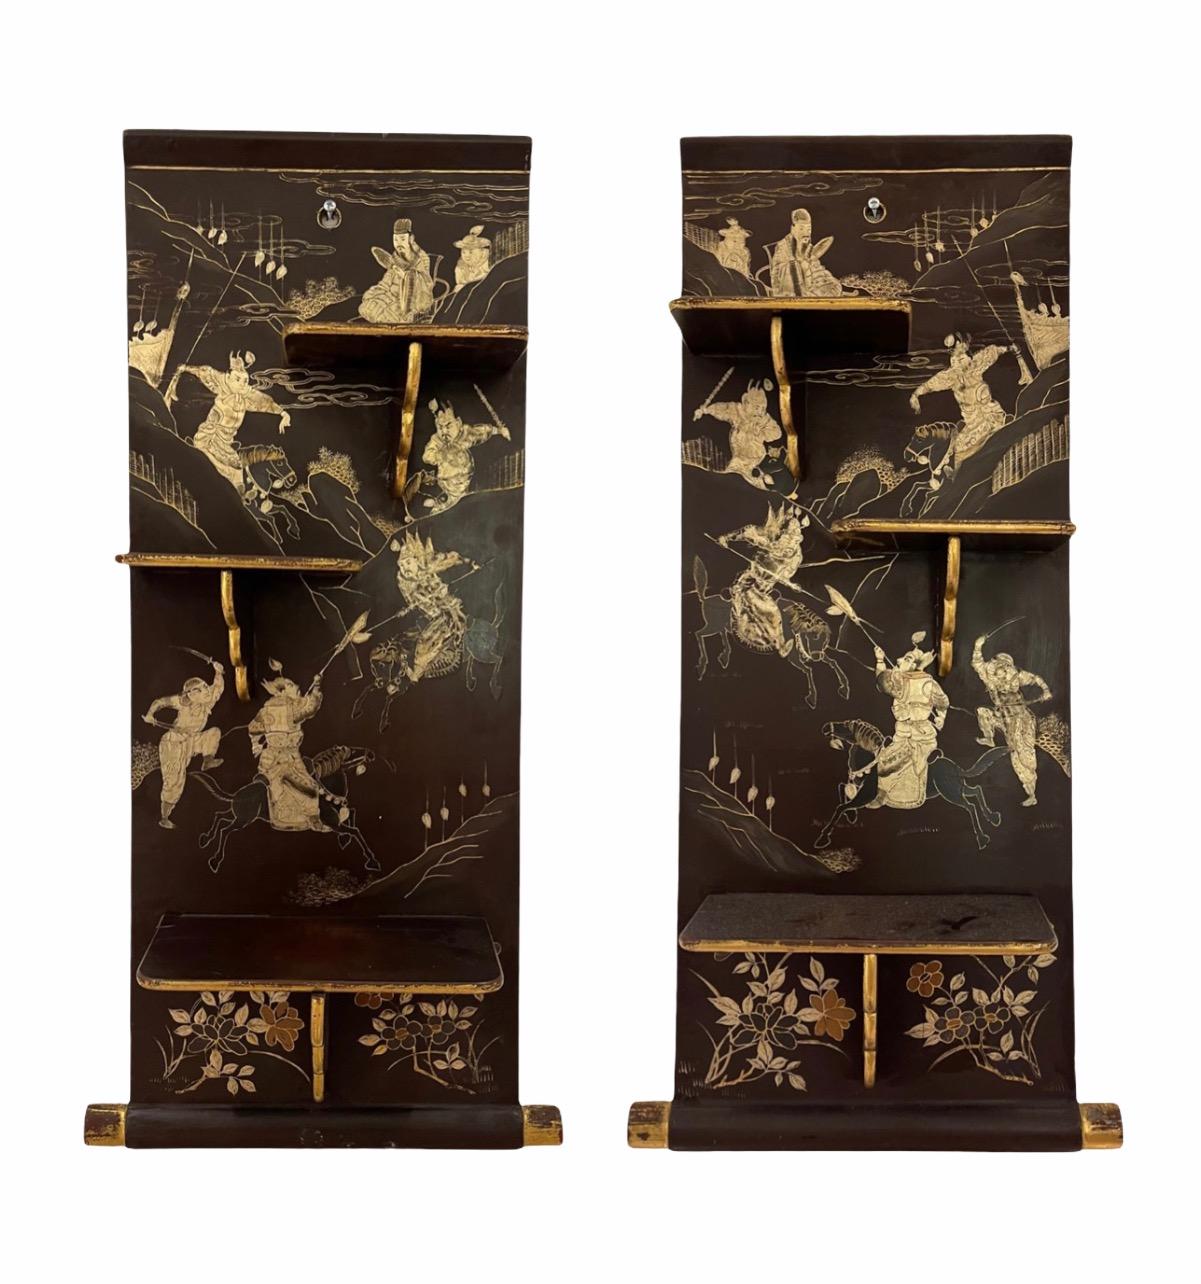 This beautiful Chinese export black lacquered pair of shelves is decorated with silver and gold leave images of the story of a Chinese warrior battle. Mini sterling sculptures and Netsukes are not included.
